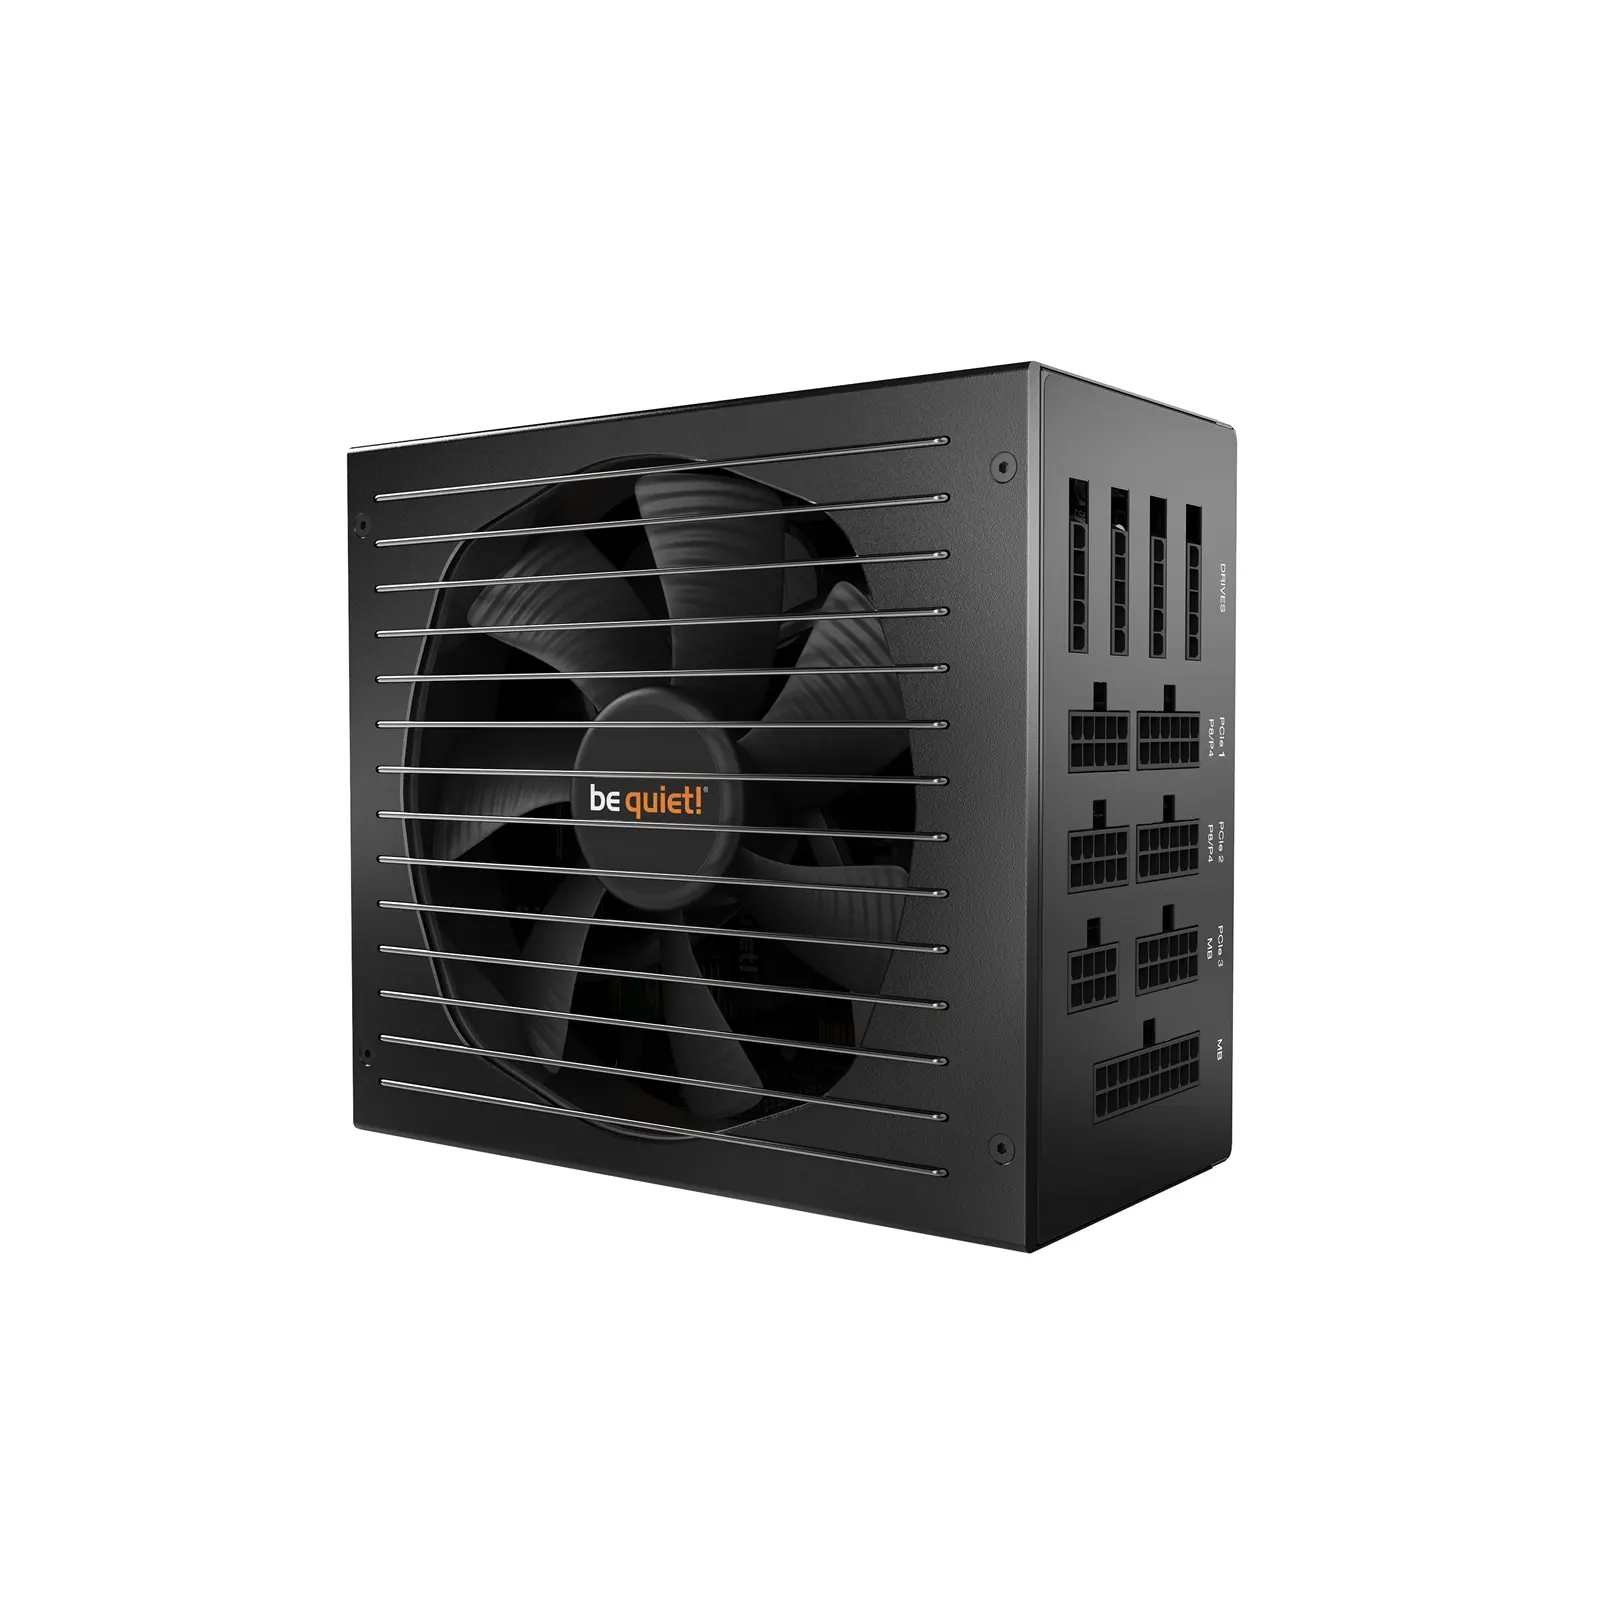 be quiet! Straight Power 11 1000W PSU, 80 PLUS Platinum, Virtually Inaudible Silent Wings 3 Fan, 6 PCIe Connectors, 5 Year Warranty